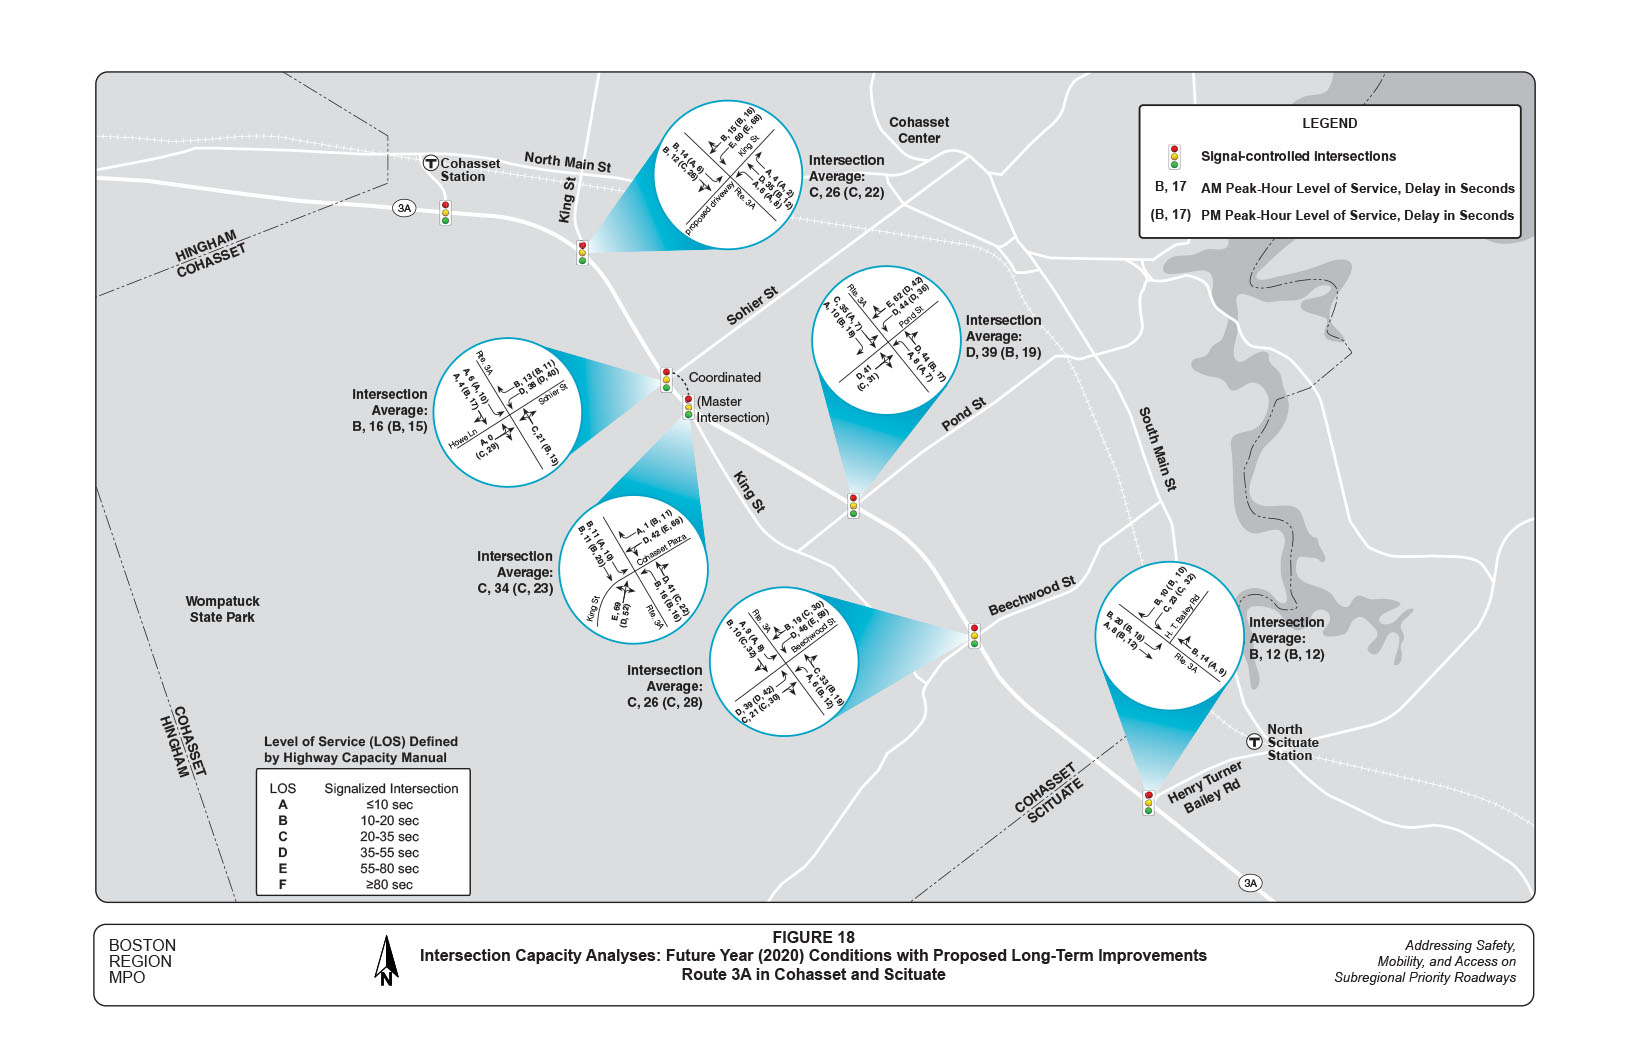 Figure 18 is a diagram that depicts the intersection capacity analyses for the future year 2020 conditions, including proposed long-term improvements for Route 3A in Cohasset and Scituate.